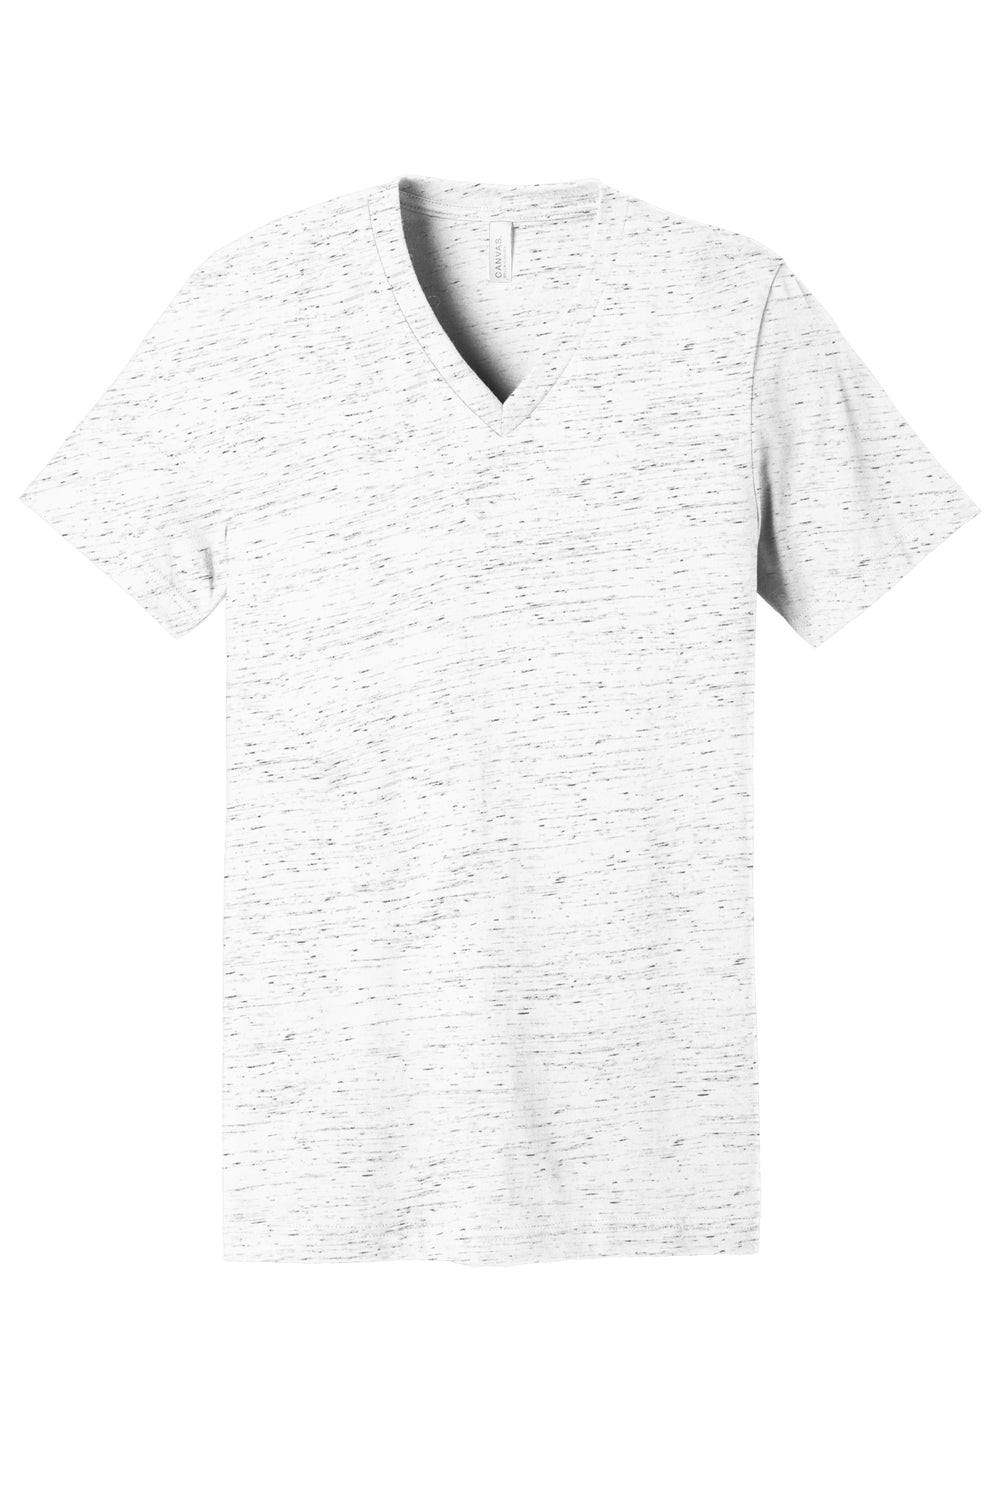 Bella + Canvas BC3655/3655C Mens Textured Jersey Short Sleeve V-Neck T-Shirt White Marble  Flat Front